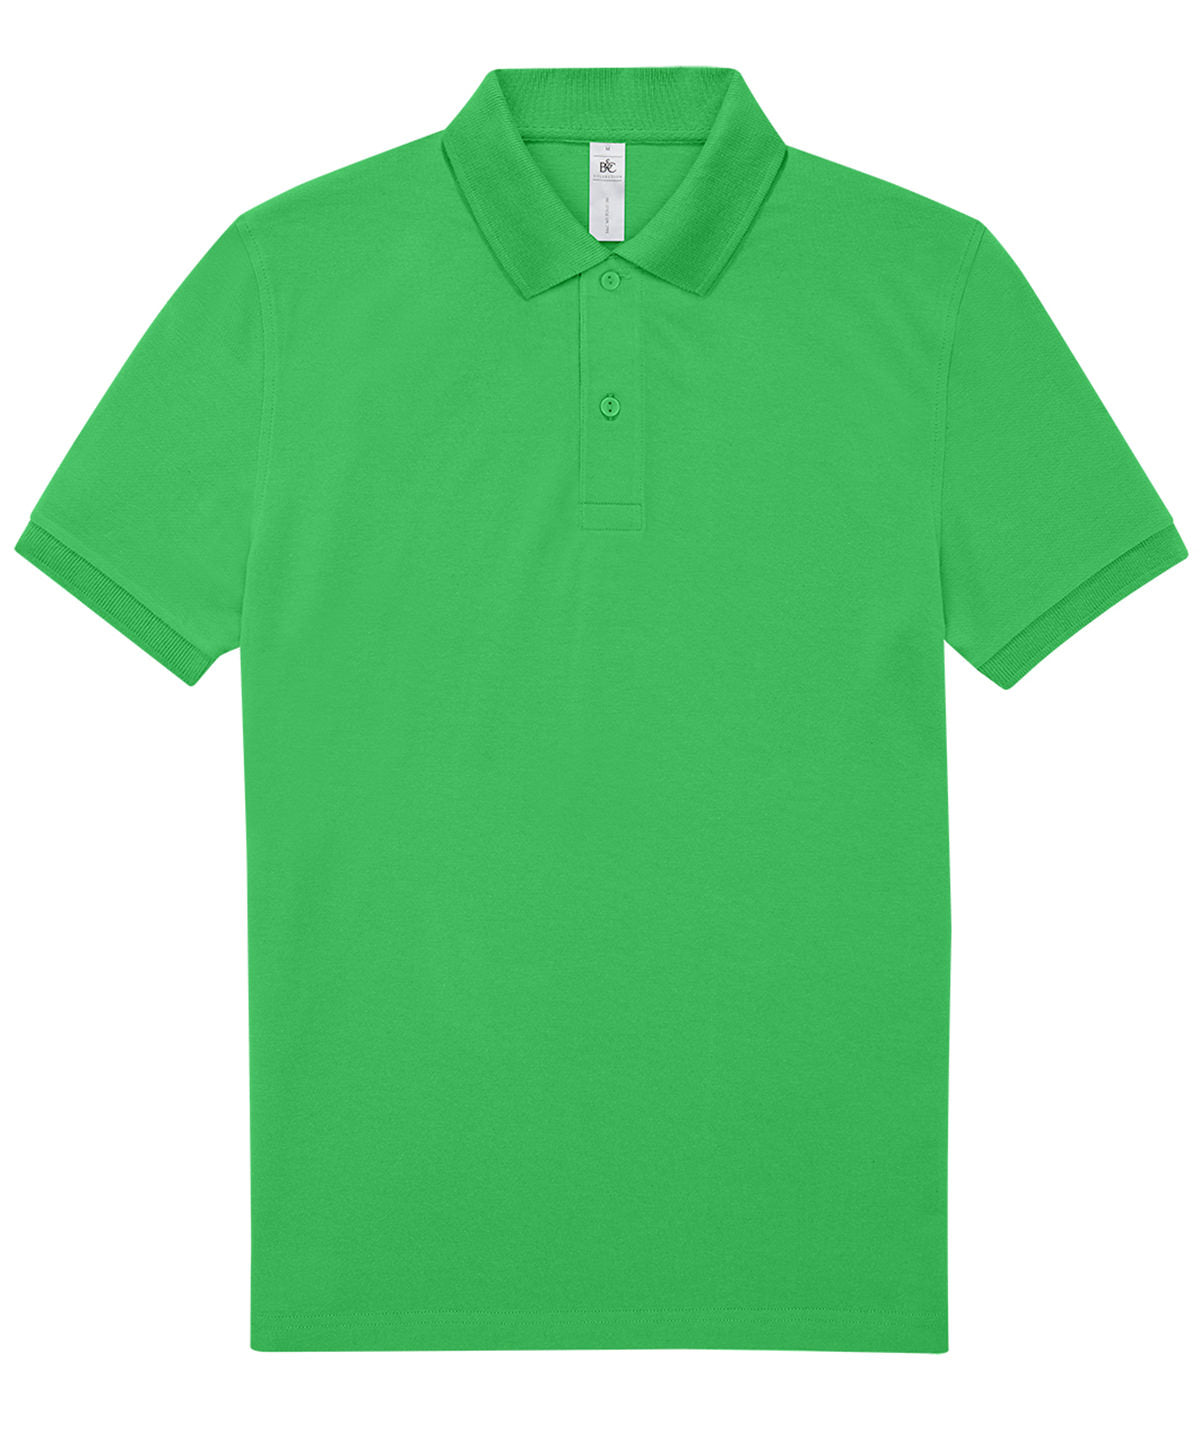 Personalised Polo Shirts - Turquoise B&C Collection B&C My Polo 180